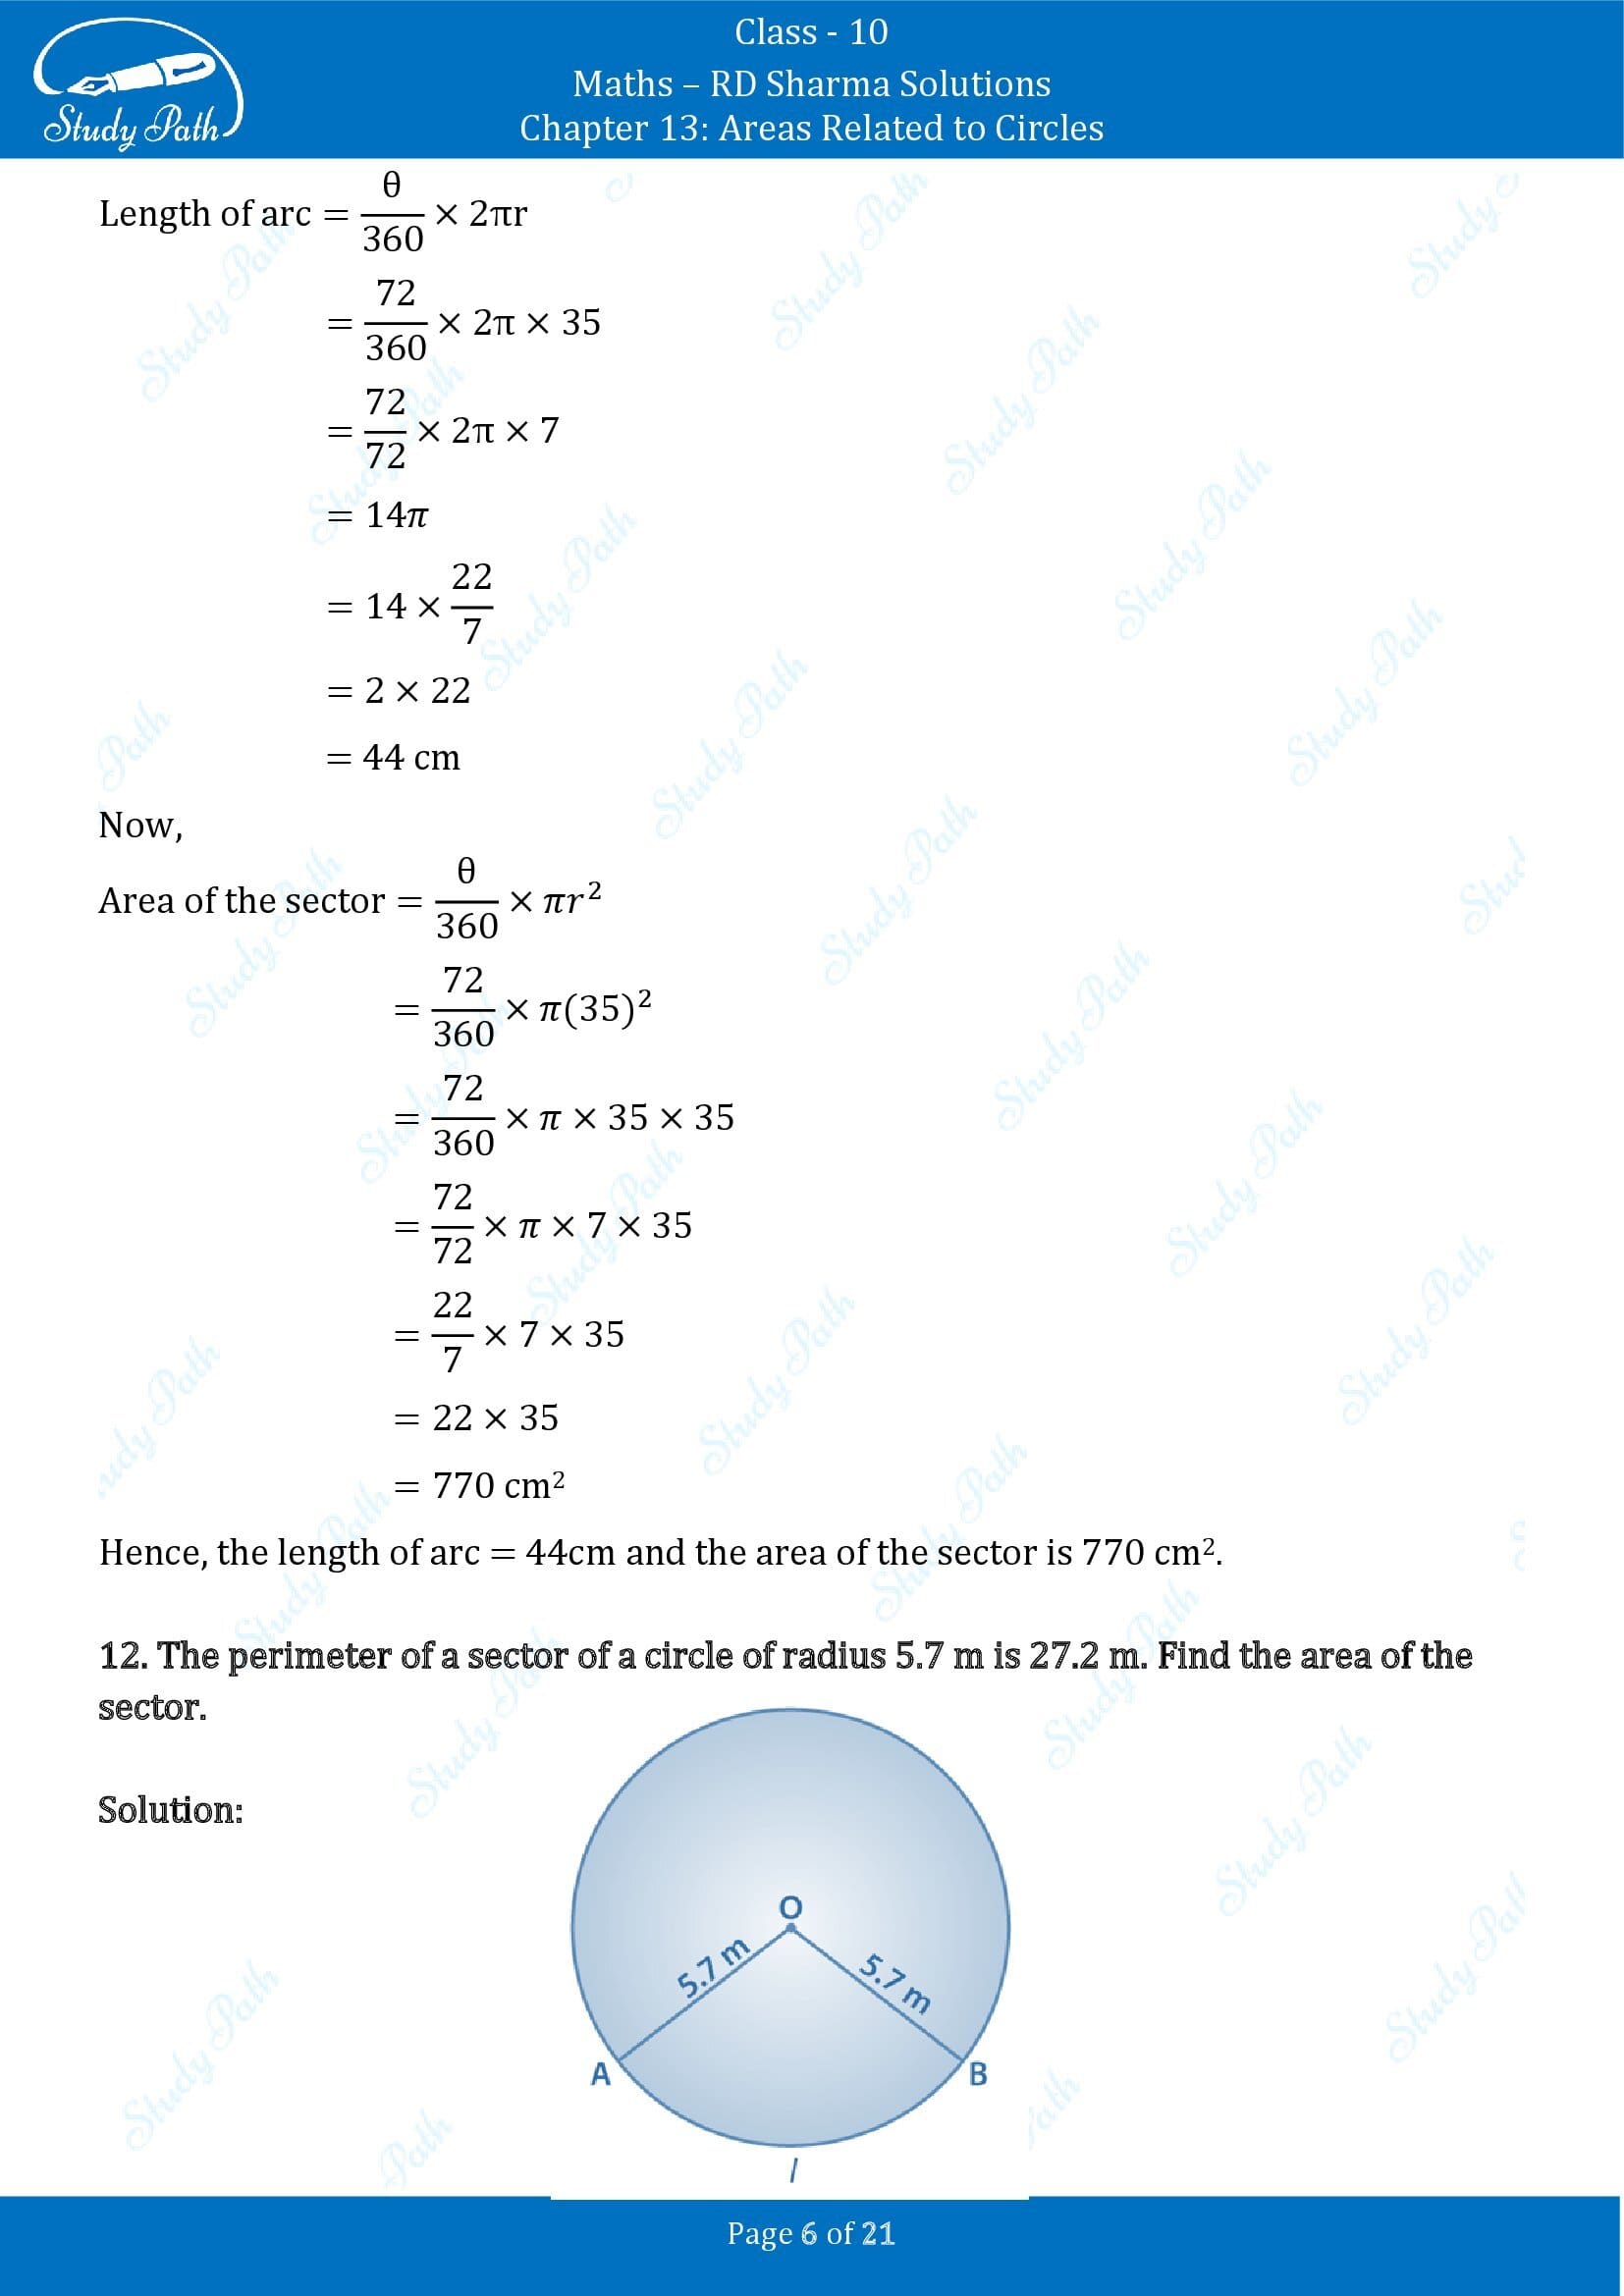 RD Sharma Solutions Class 10 Chapter 13 Areas Related to Circles Exercise 13.2 00006